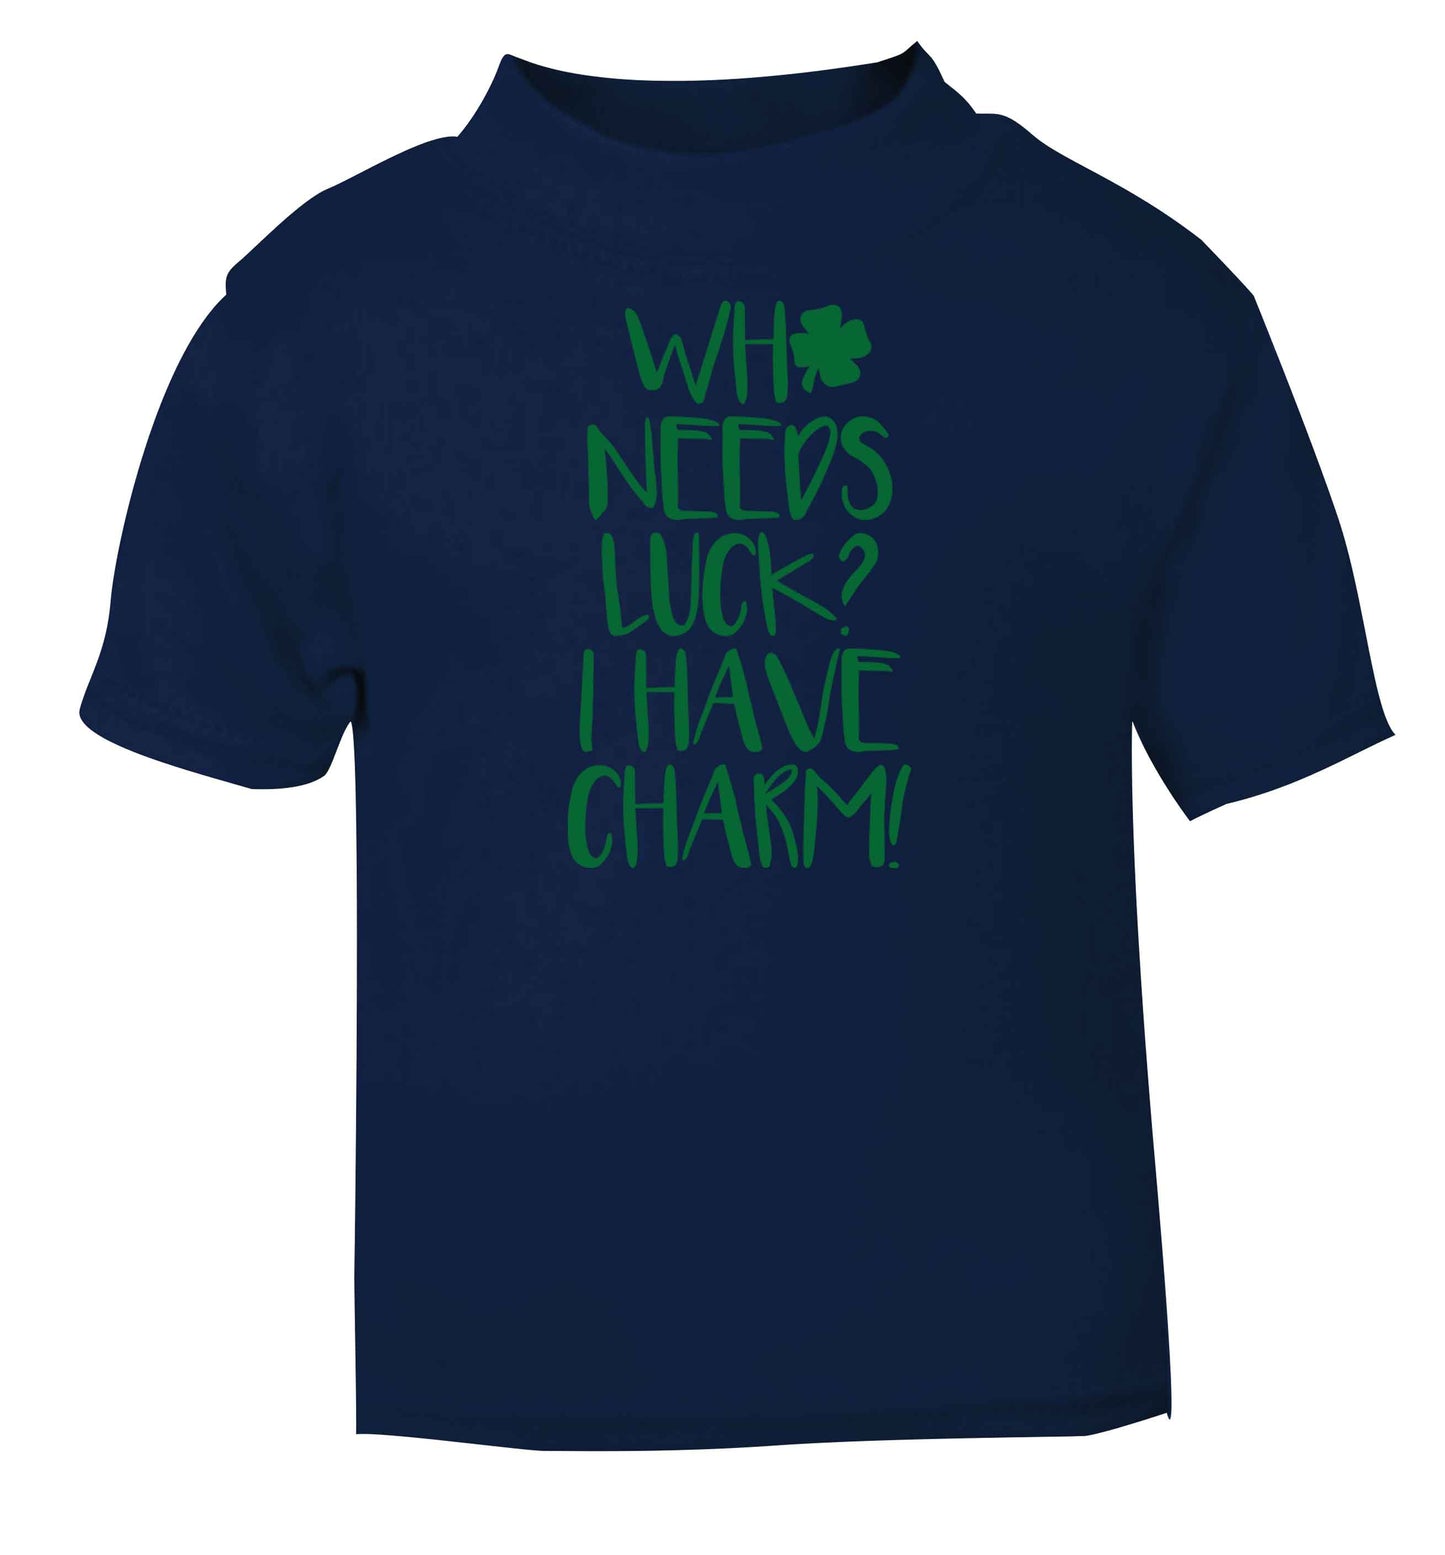 Who needs luck? I have charm! navy baby toddler Tshirt 2 Years